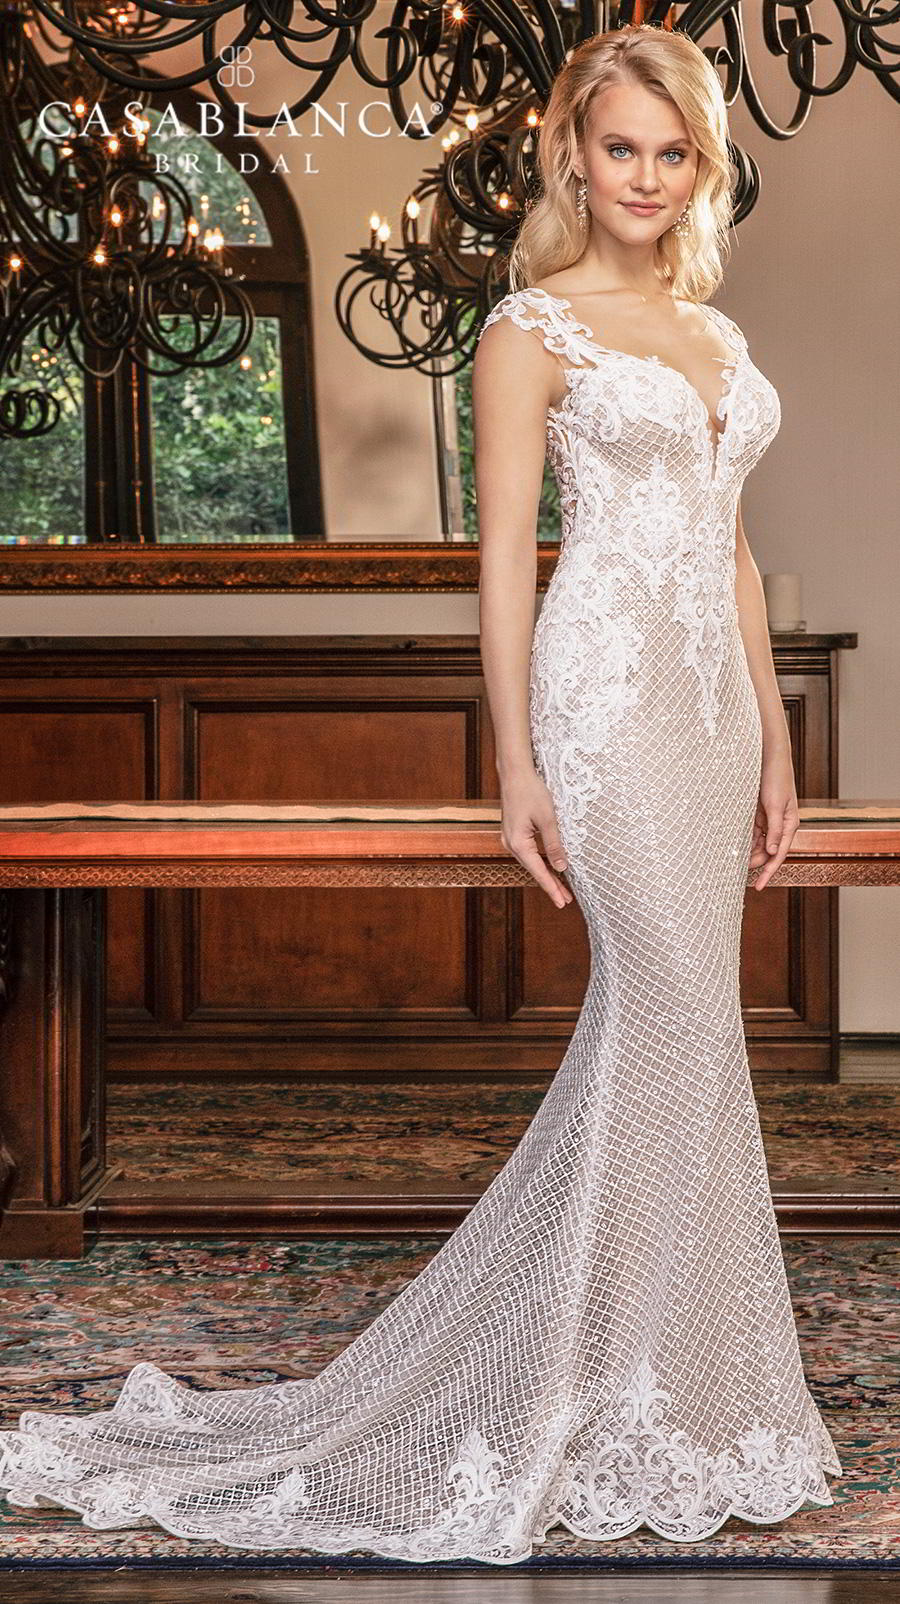 Forever Yours, Casablanca Bridal's Stunning Fall 2019 Wedding Dresses